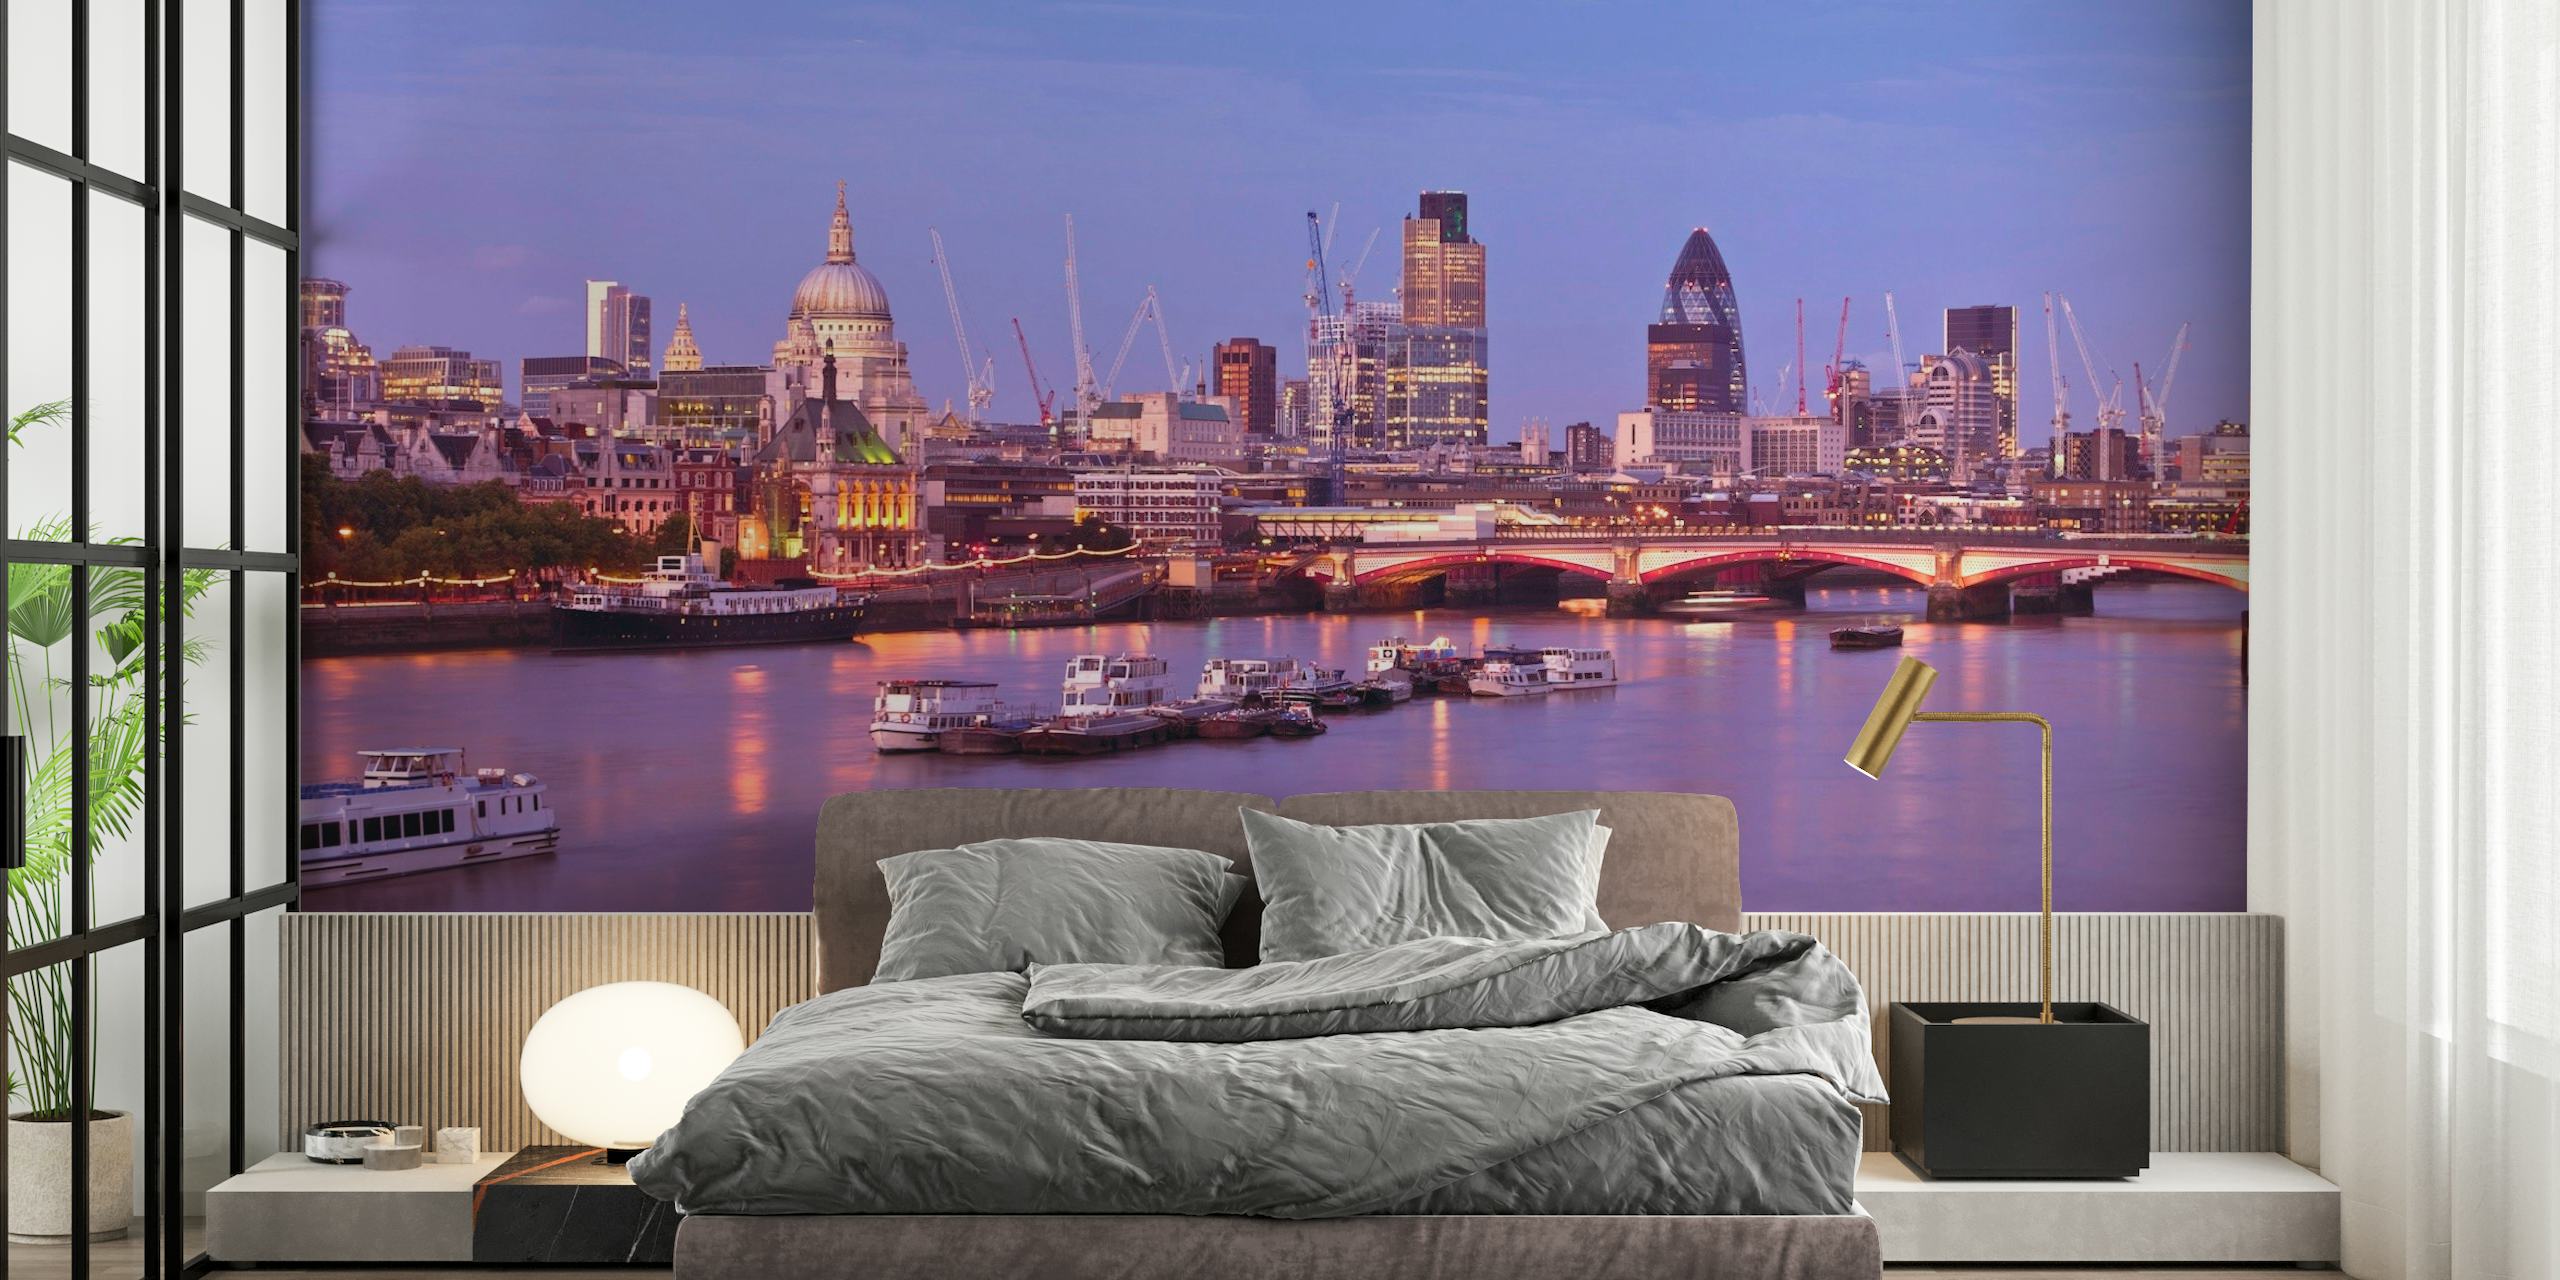 Wall mural of the River Thames in London at dusk with city skyline